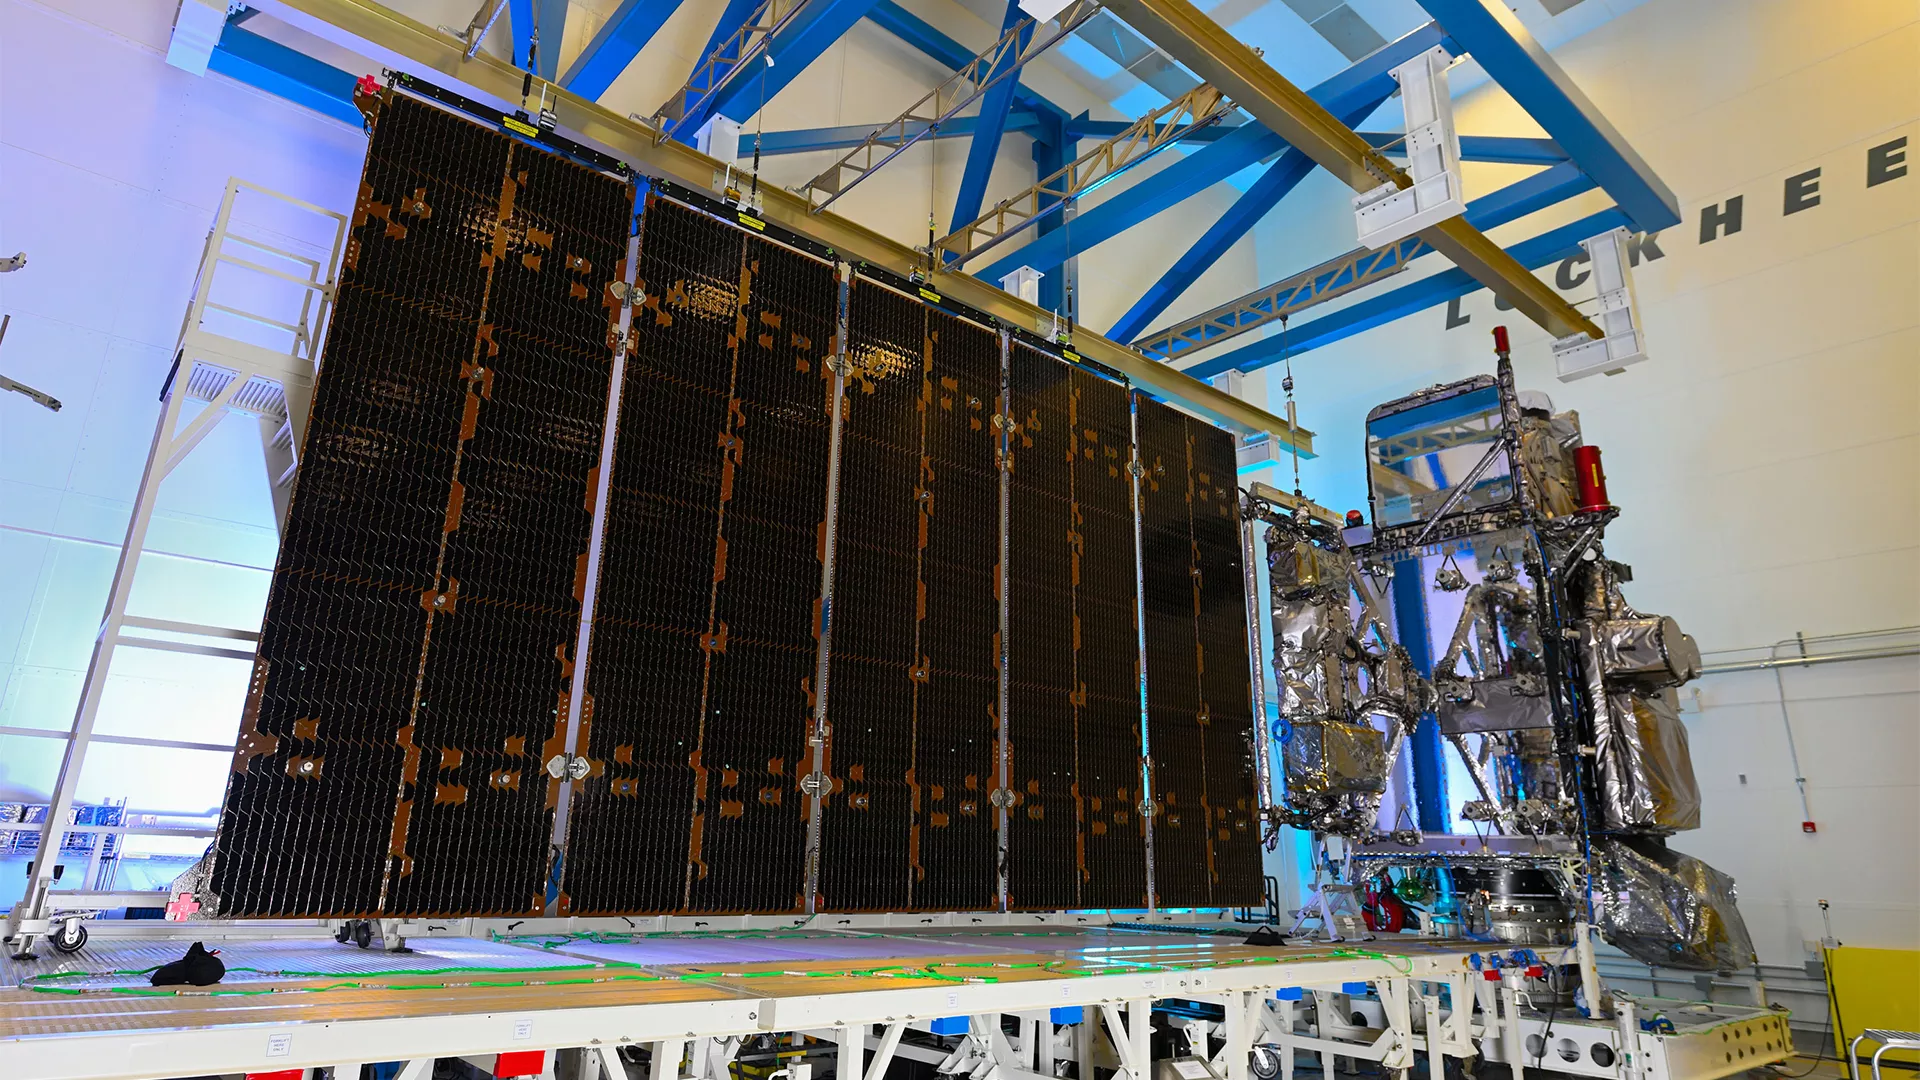 The GOES-T satellite with solar array fully deployed.